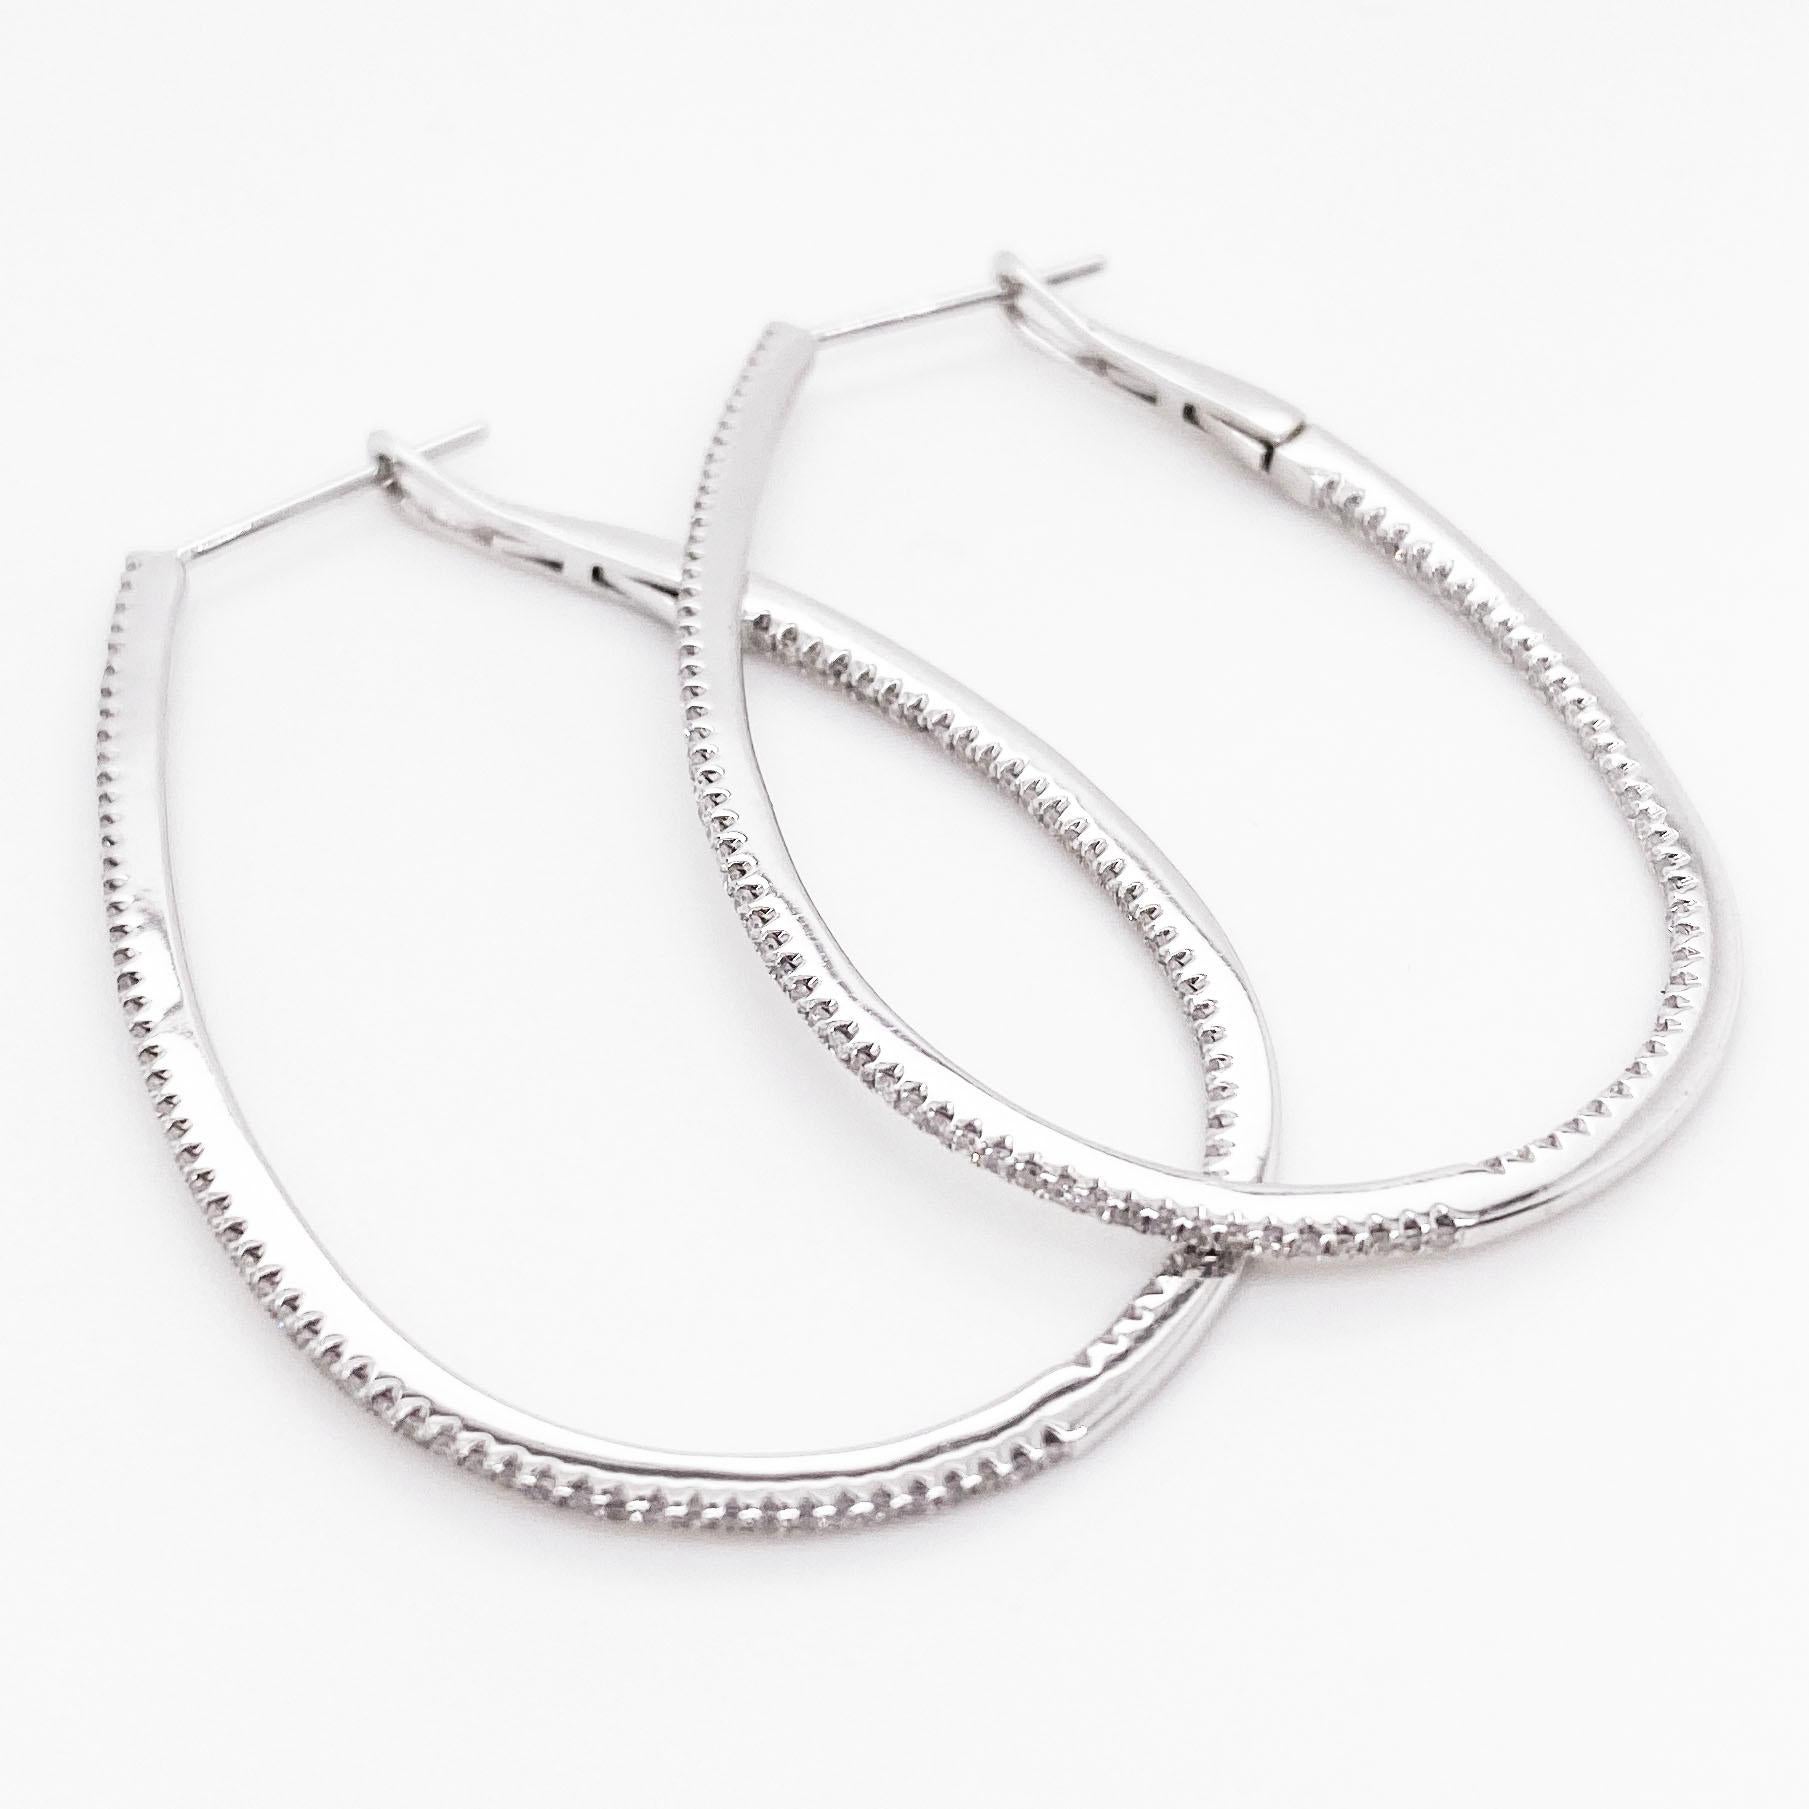 These extra large diamond inside out hoops are a staple in any fine jewelry collection. The elongated oval diameter is a unique hoop shape that's perfect for any occasion. They can be worn casually or for a more formal event. The hoops have round